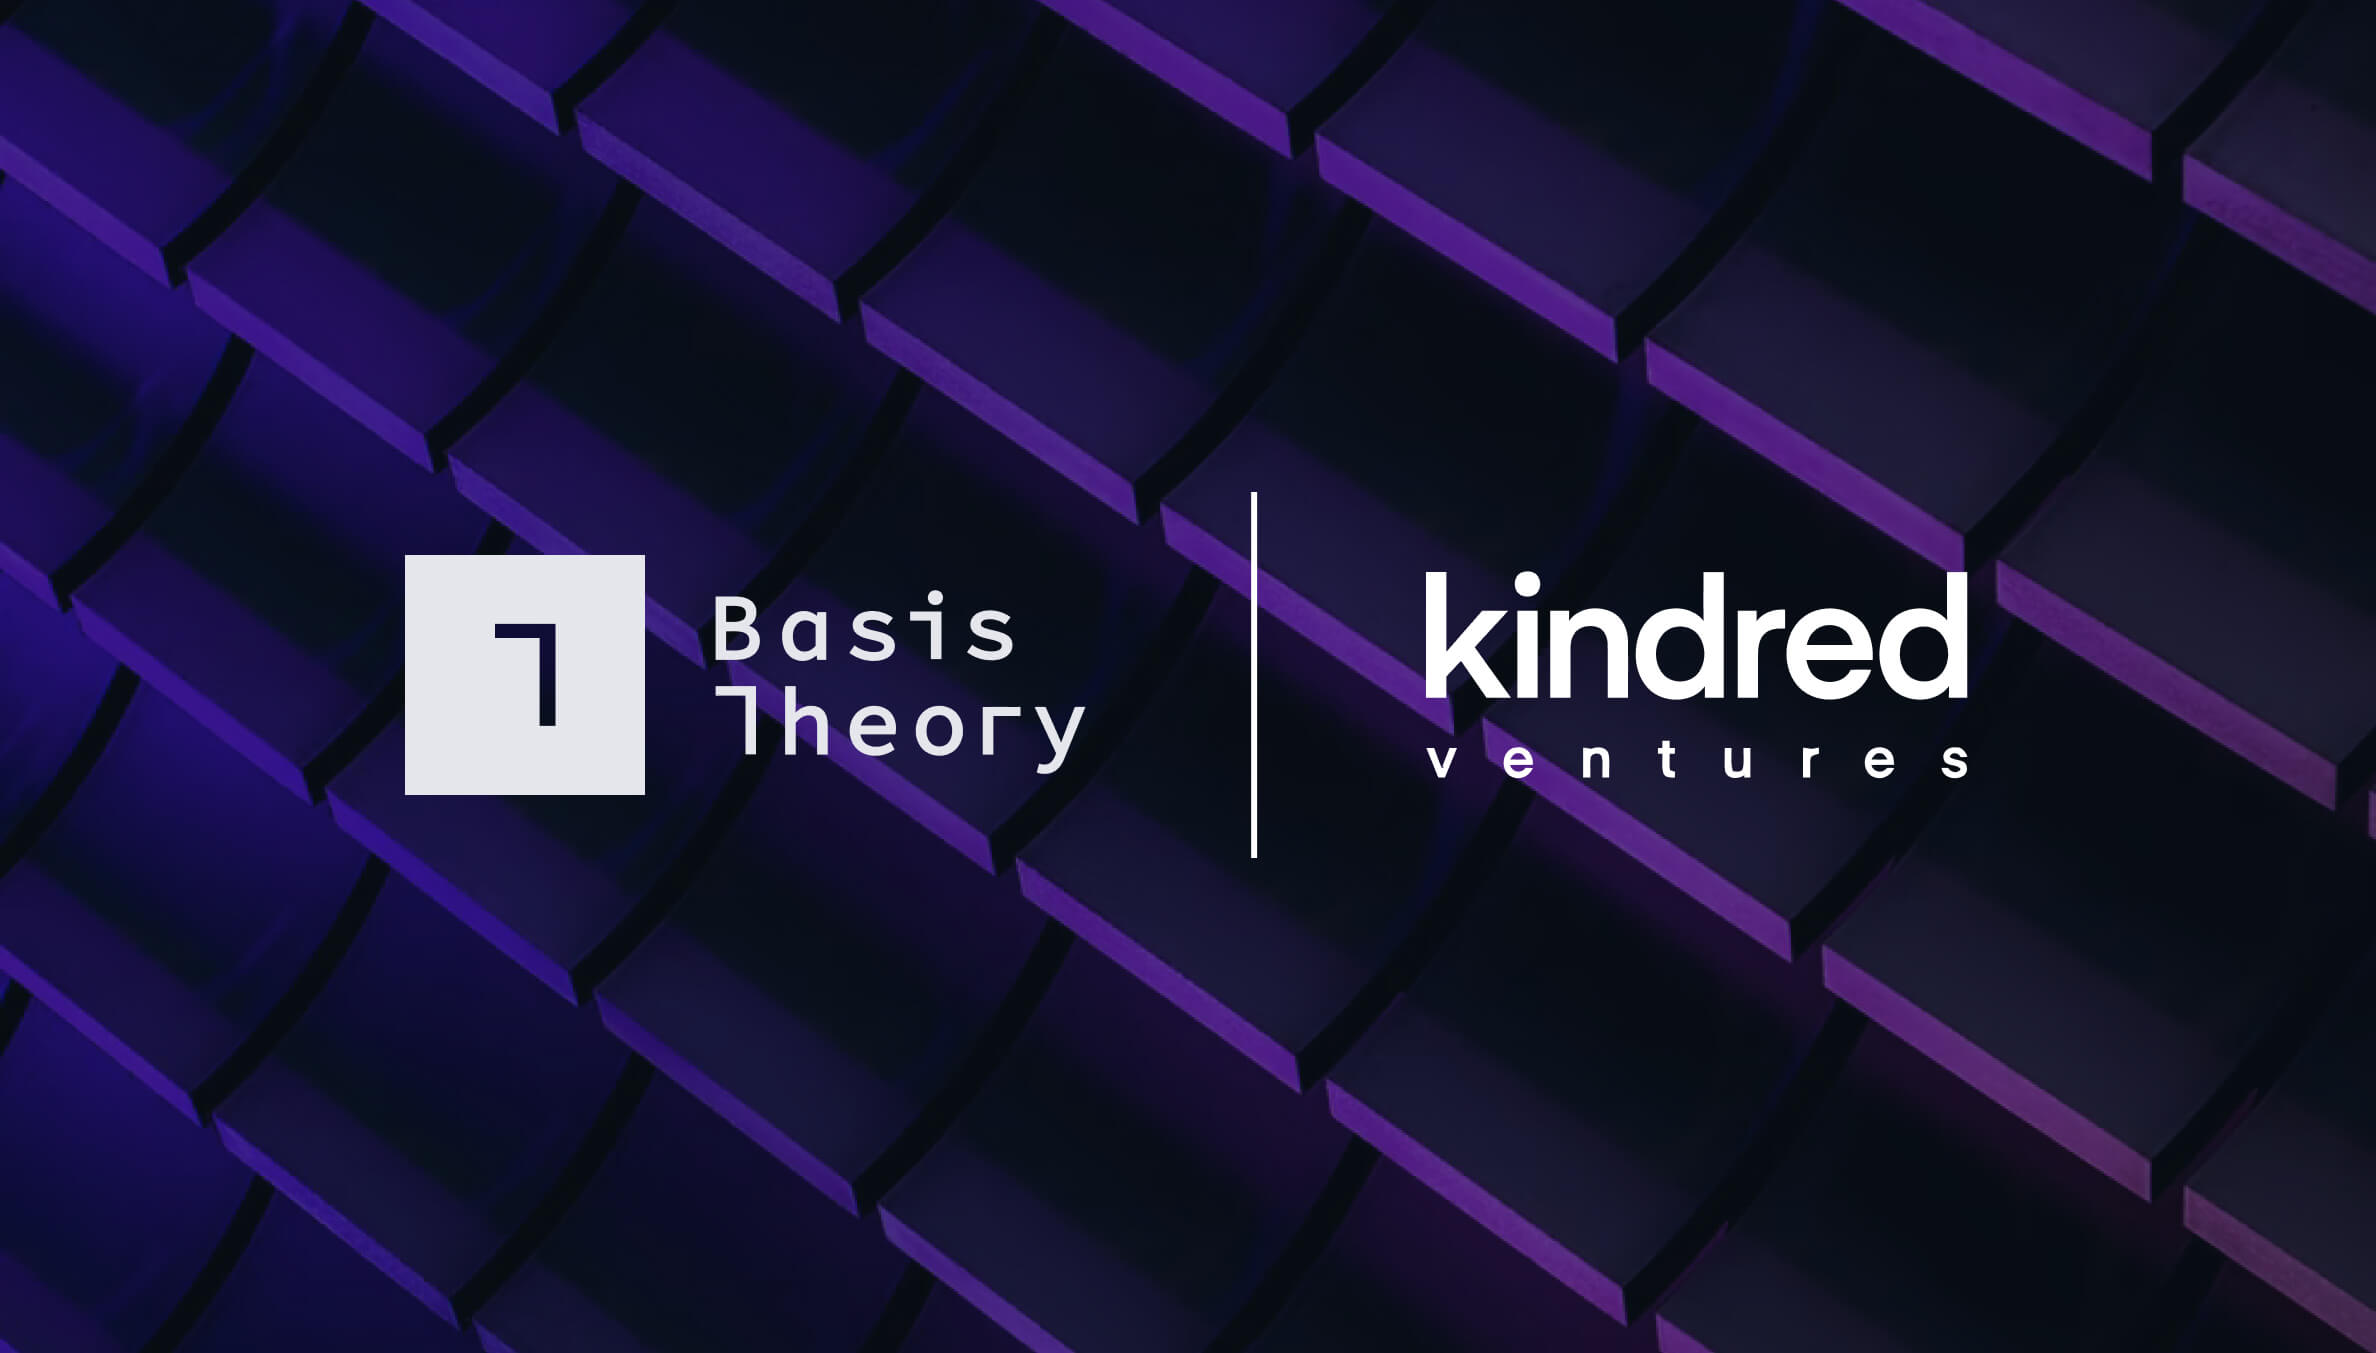 Kindred Ventures and Basis Theory